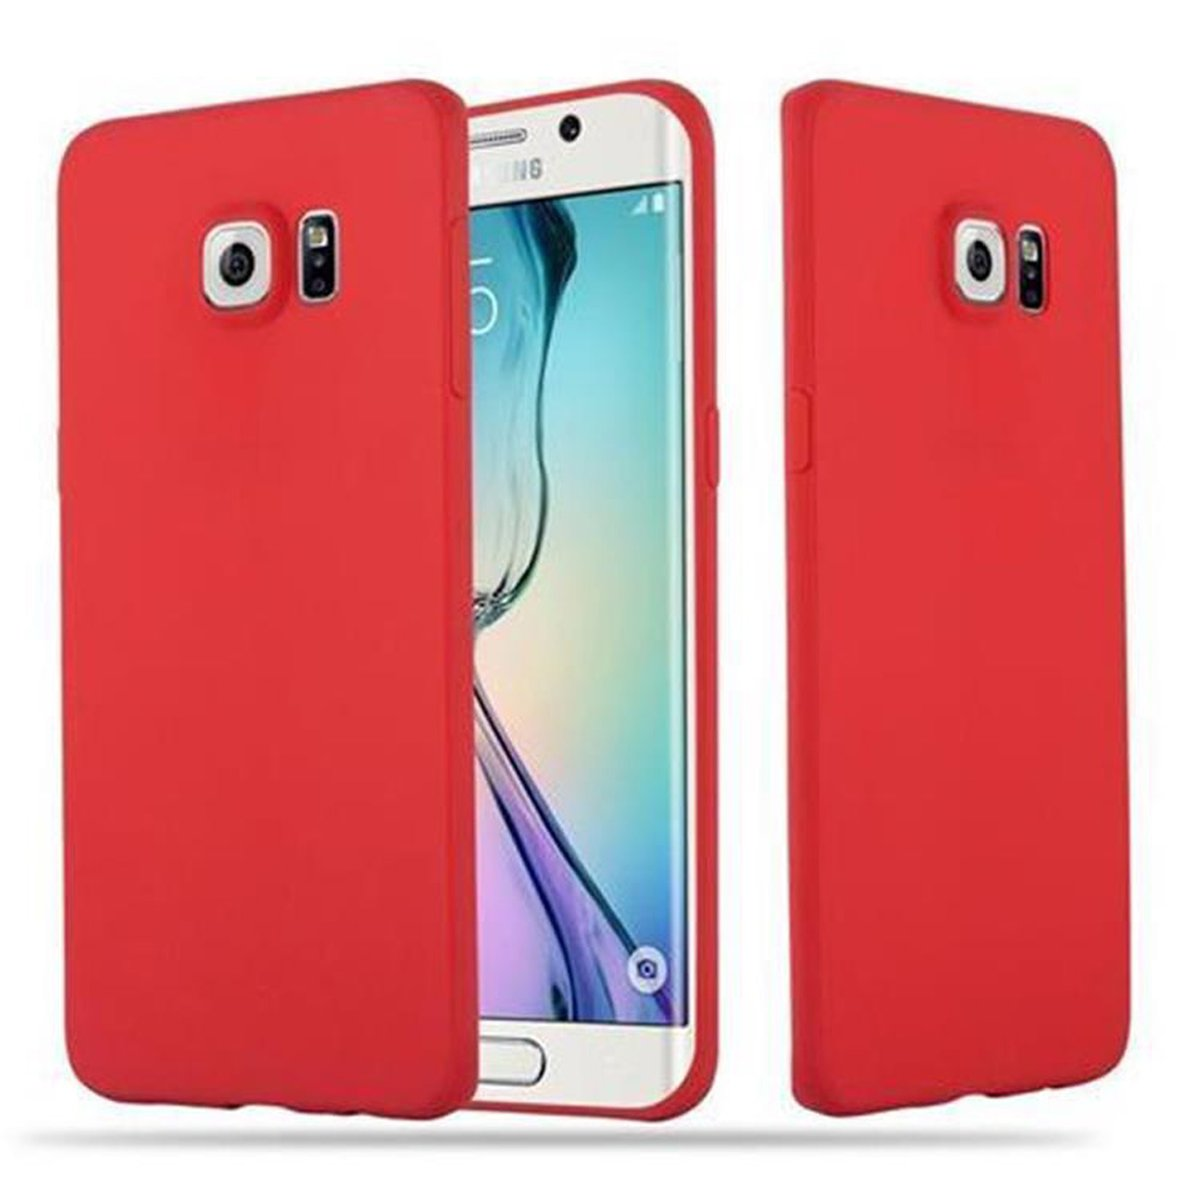 Backcover, CADORABO CANDY Samsung, Hülle Style, im Galaxy EDGE PLUS, TPU S6 Candy ROT